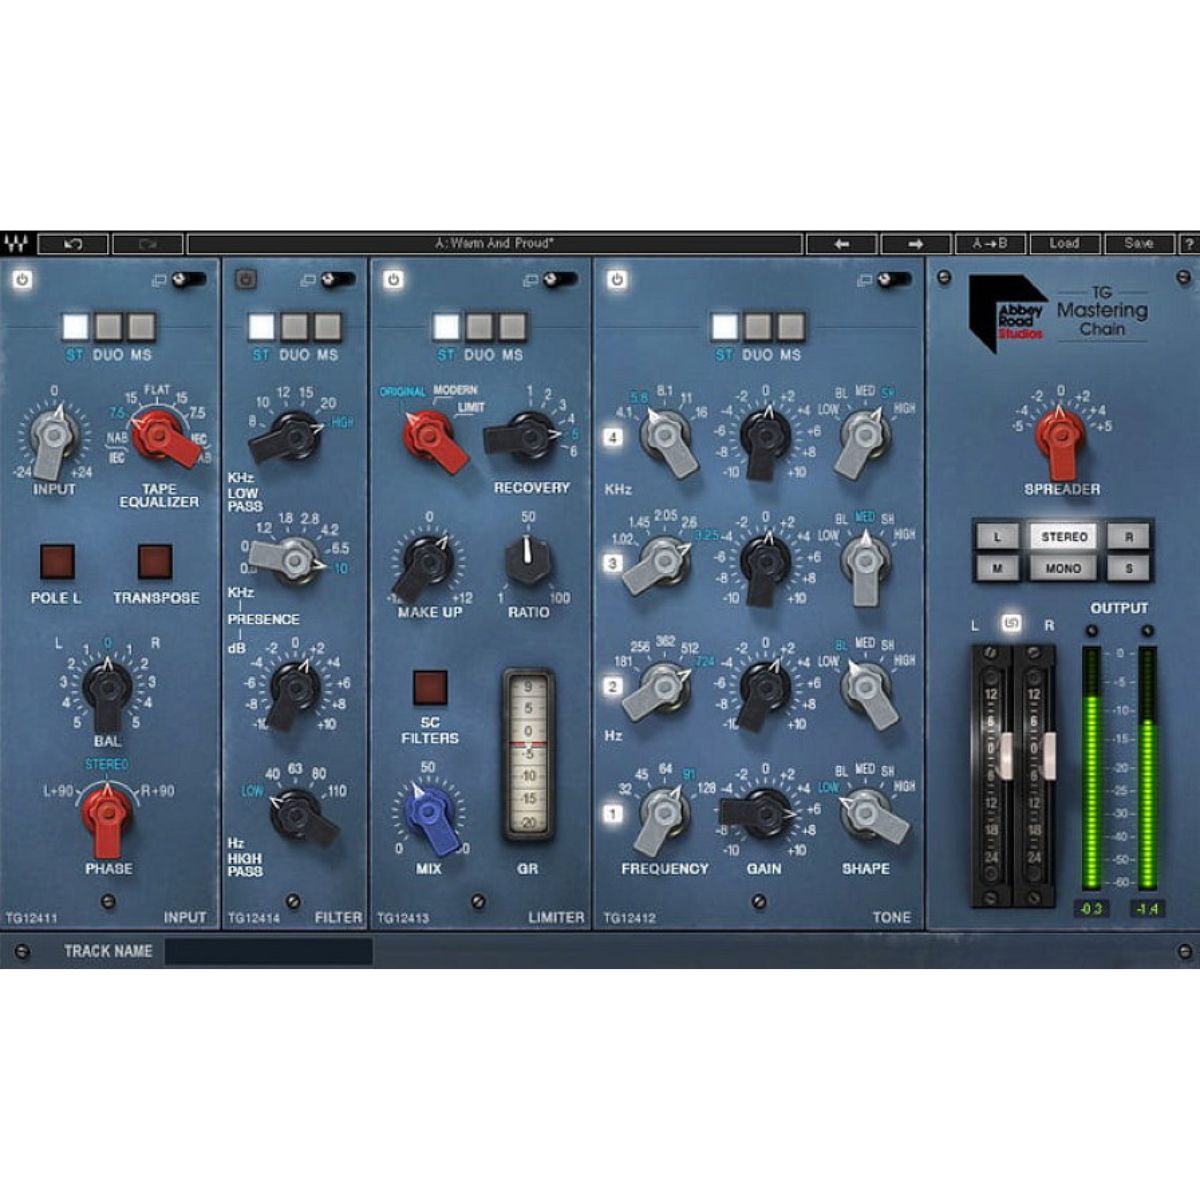 Waves Abbey Road TG Mastering Chain Equalizer plug-in